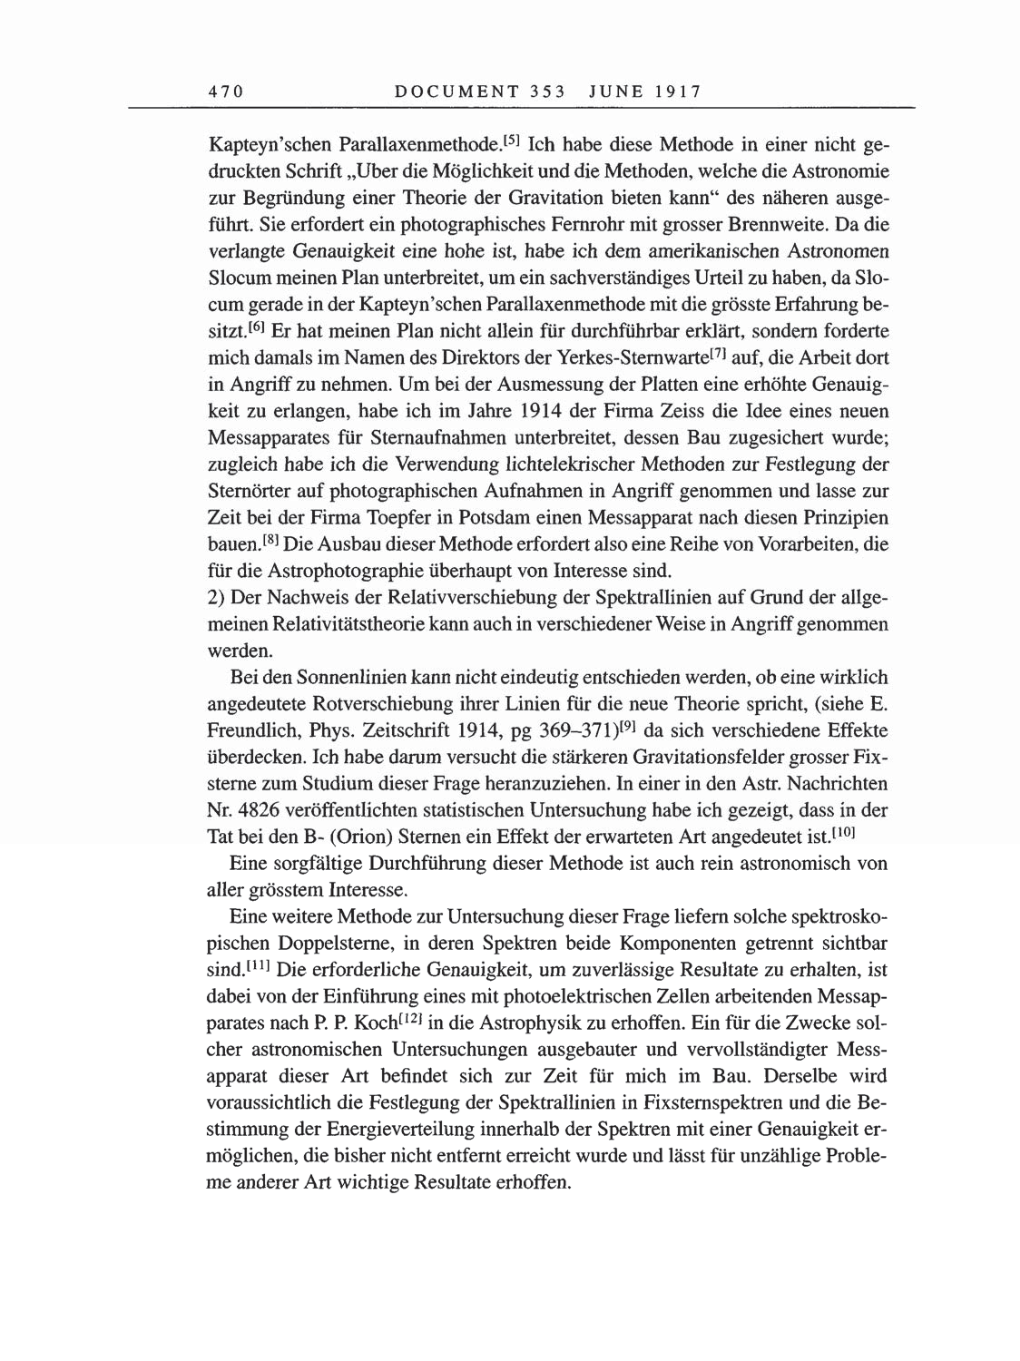 Volume 8, Part A: The Berlin Years: Correspondence 1914-1917 page 470